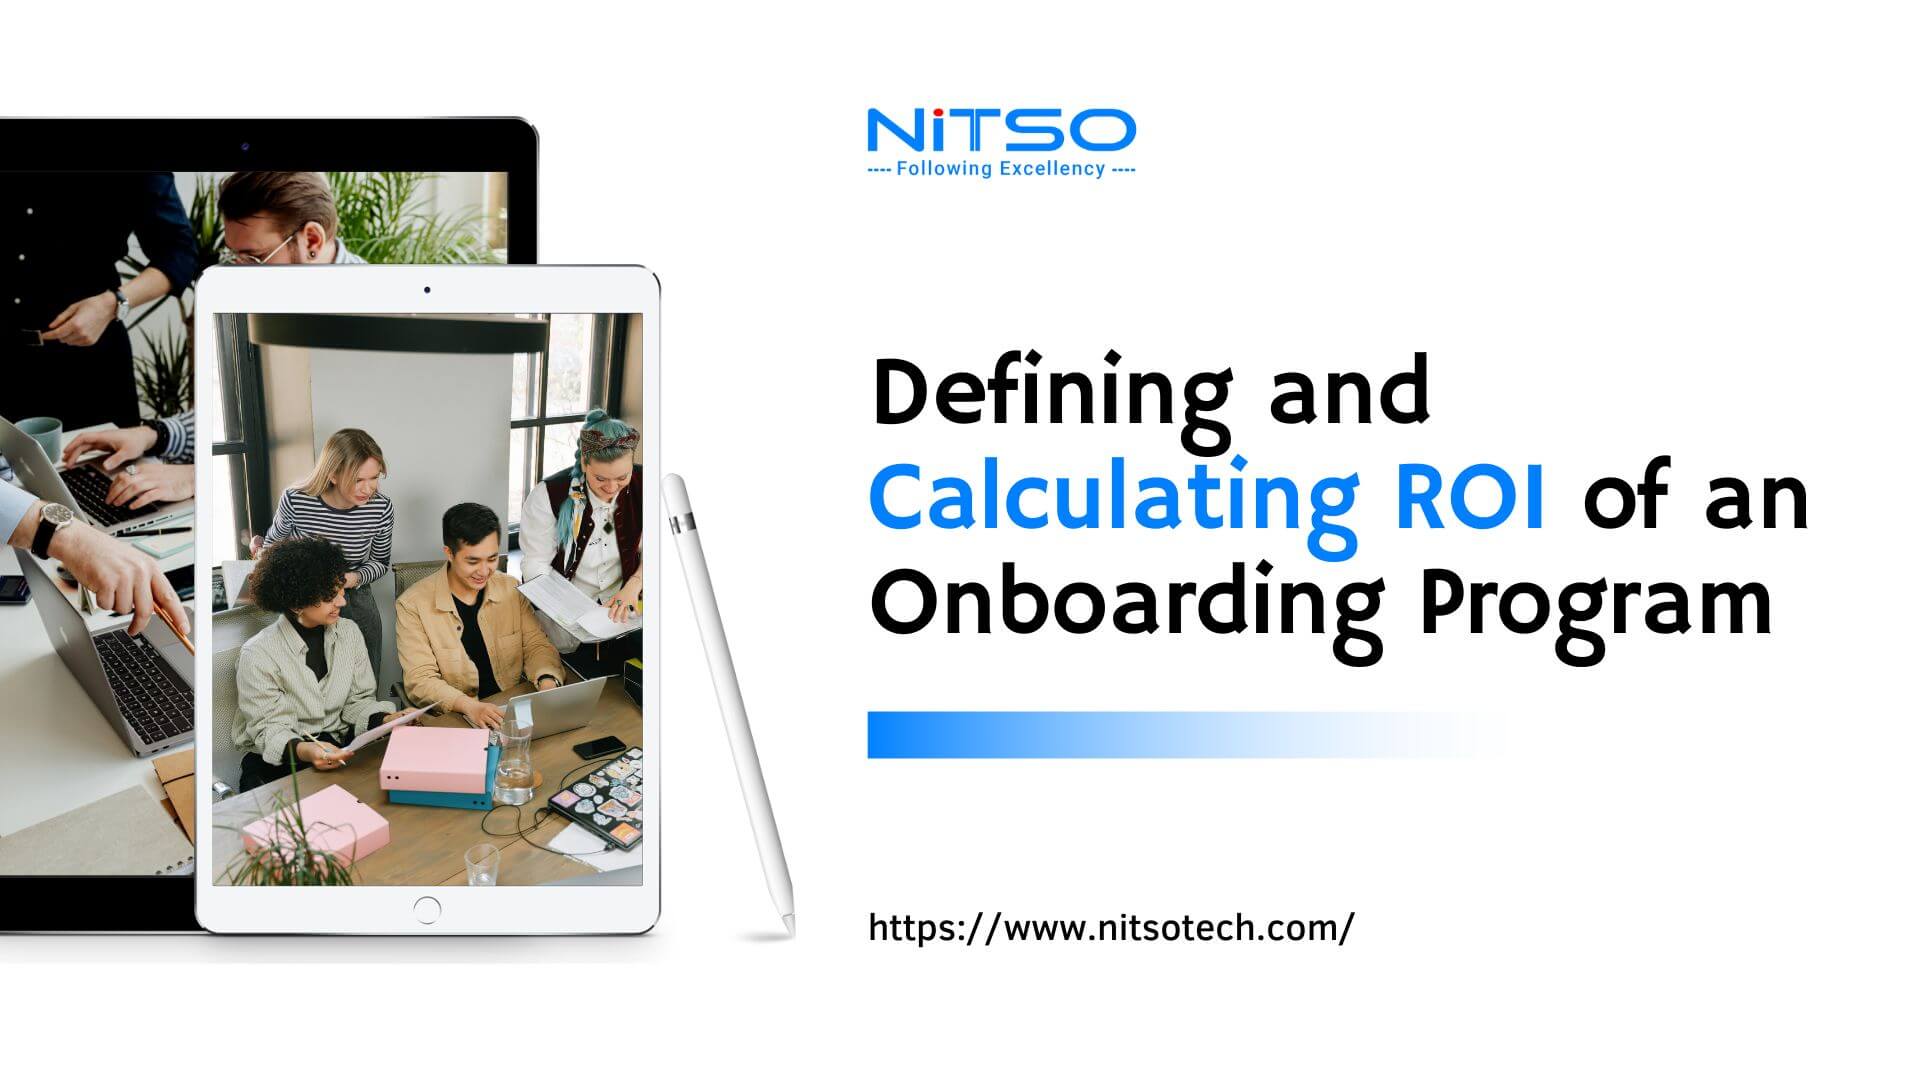 Defining and Calculating ROI of an Onboarding Program